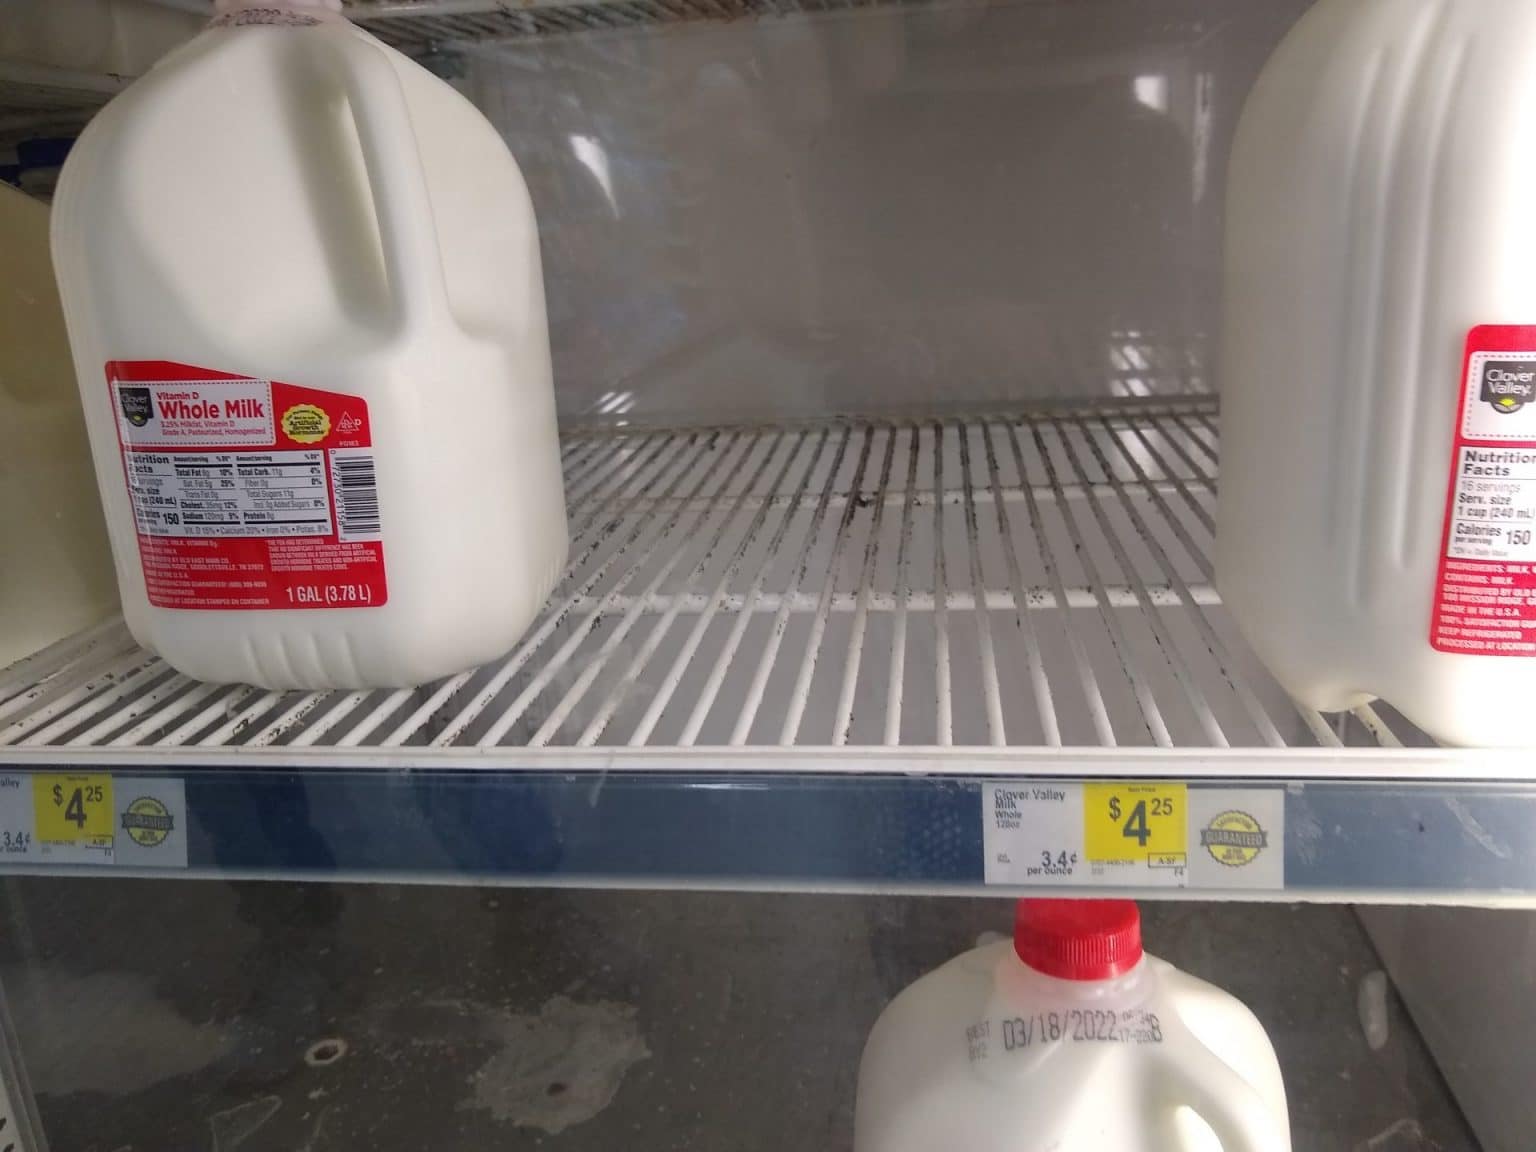 Where Does Dollar General Get Its Milk From? DOLLAR STORE REVIEWER